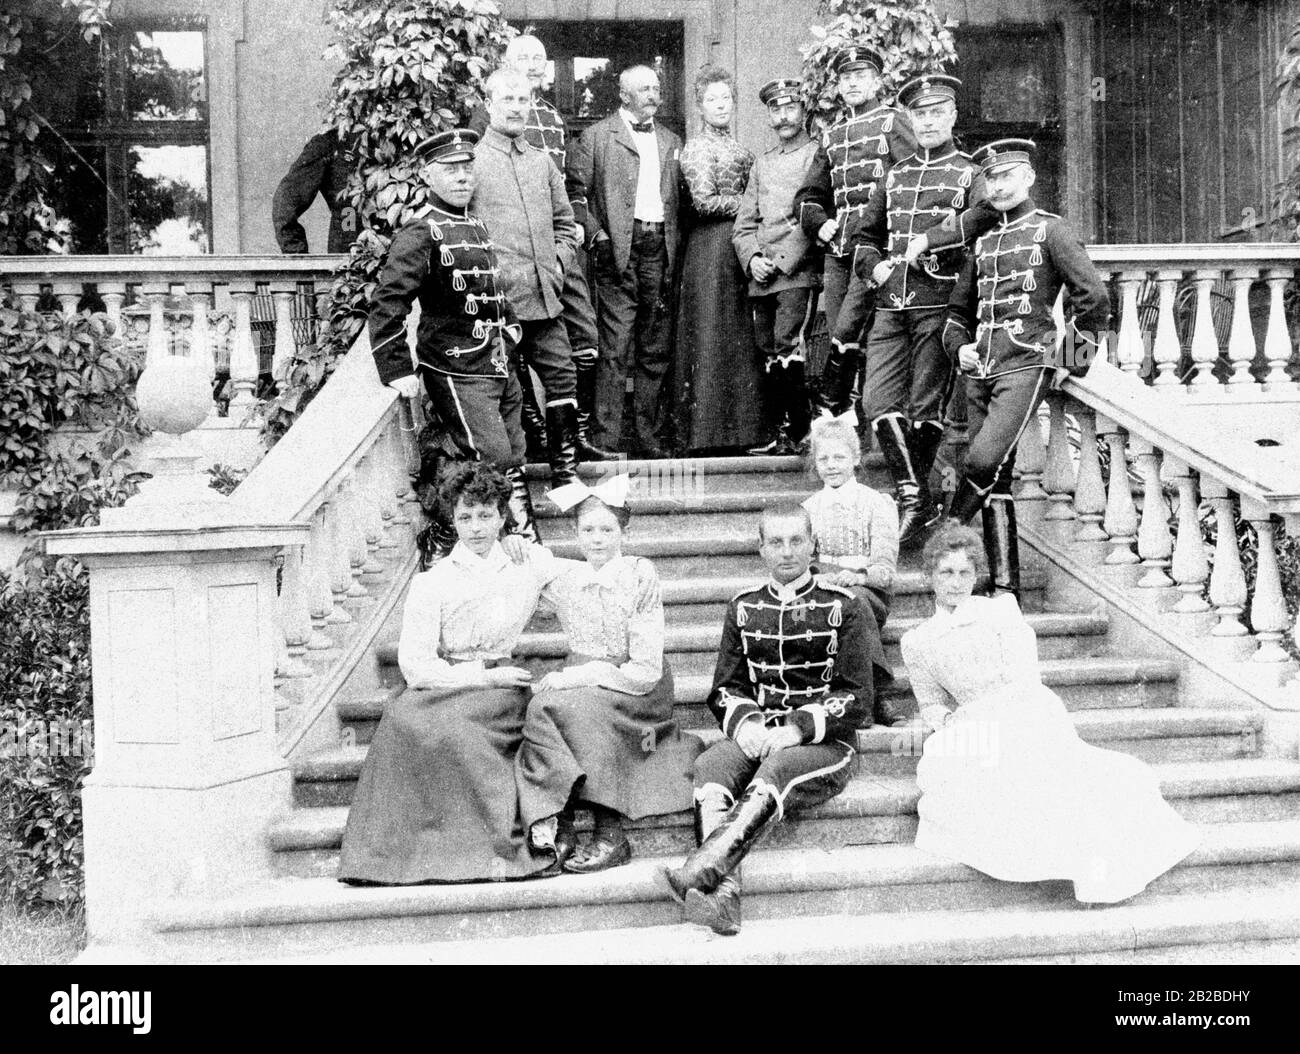 Officers of the Imperial Staff of the Leibhusaren on the Garden estate with the owner's family on the outside staircase of the manor house. The soldiers are there for the annual social event 'Herbstmanoever' (Autumn maneuvers). Stock Photo